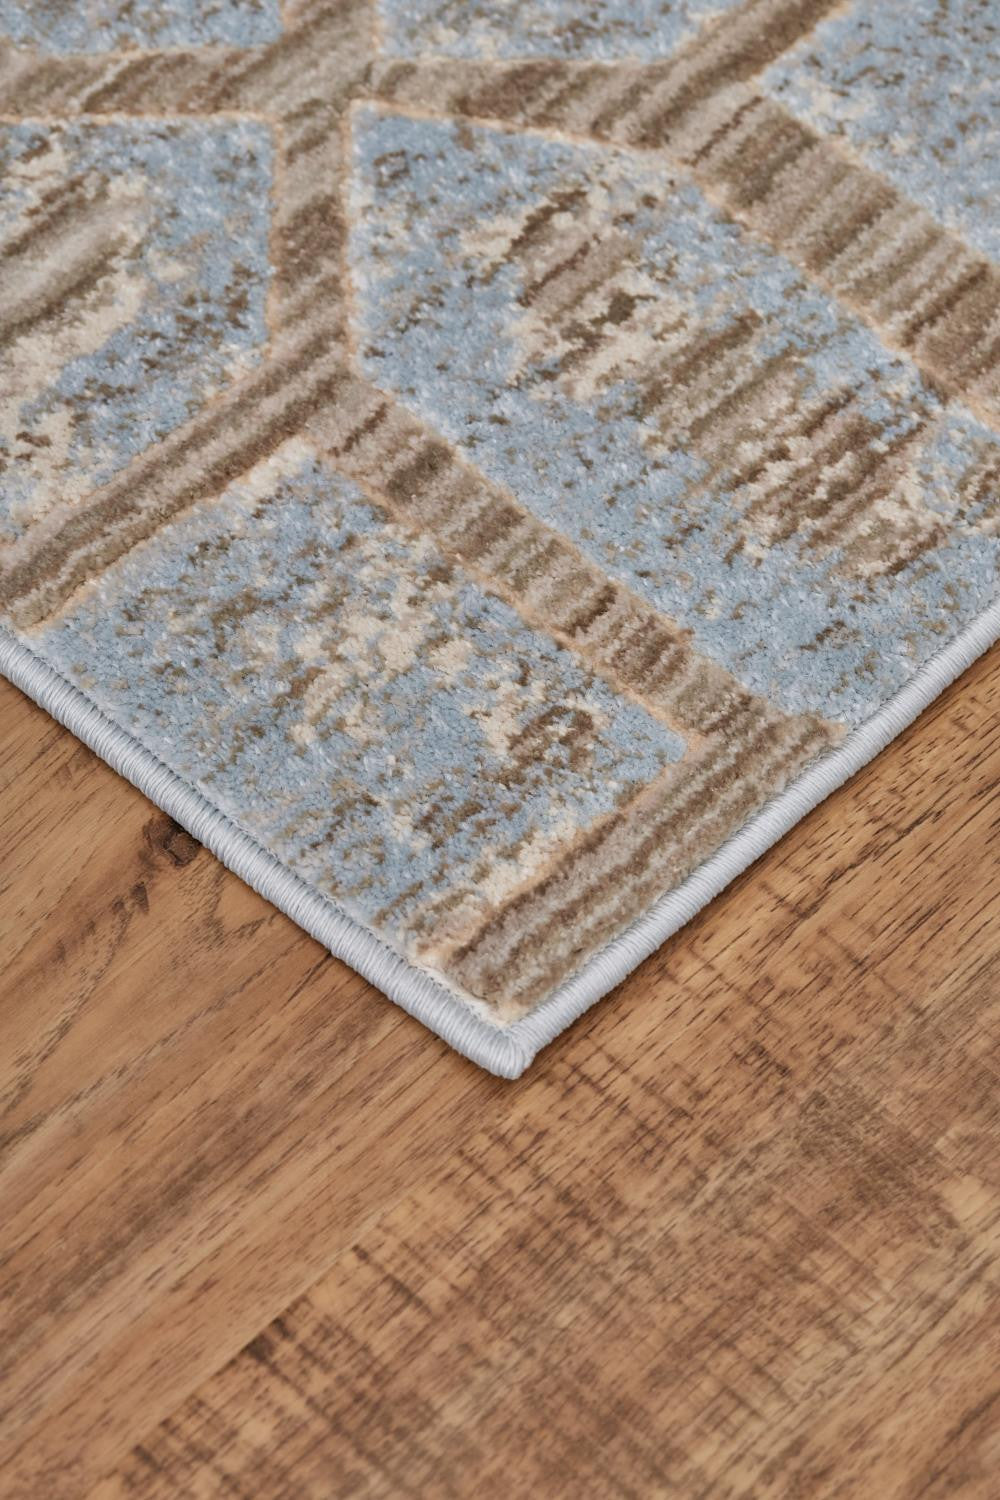 Blue Taupe And Ivory Floral Distressed Stain Resistant Area Rug - 2' X 4'